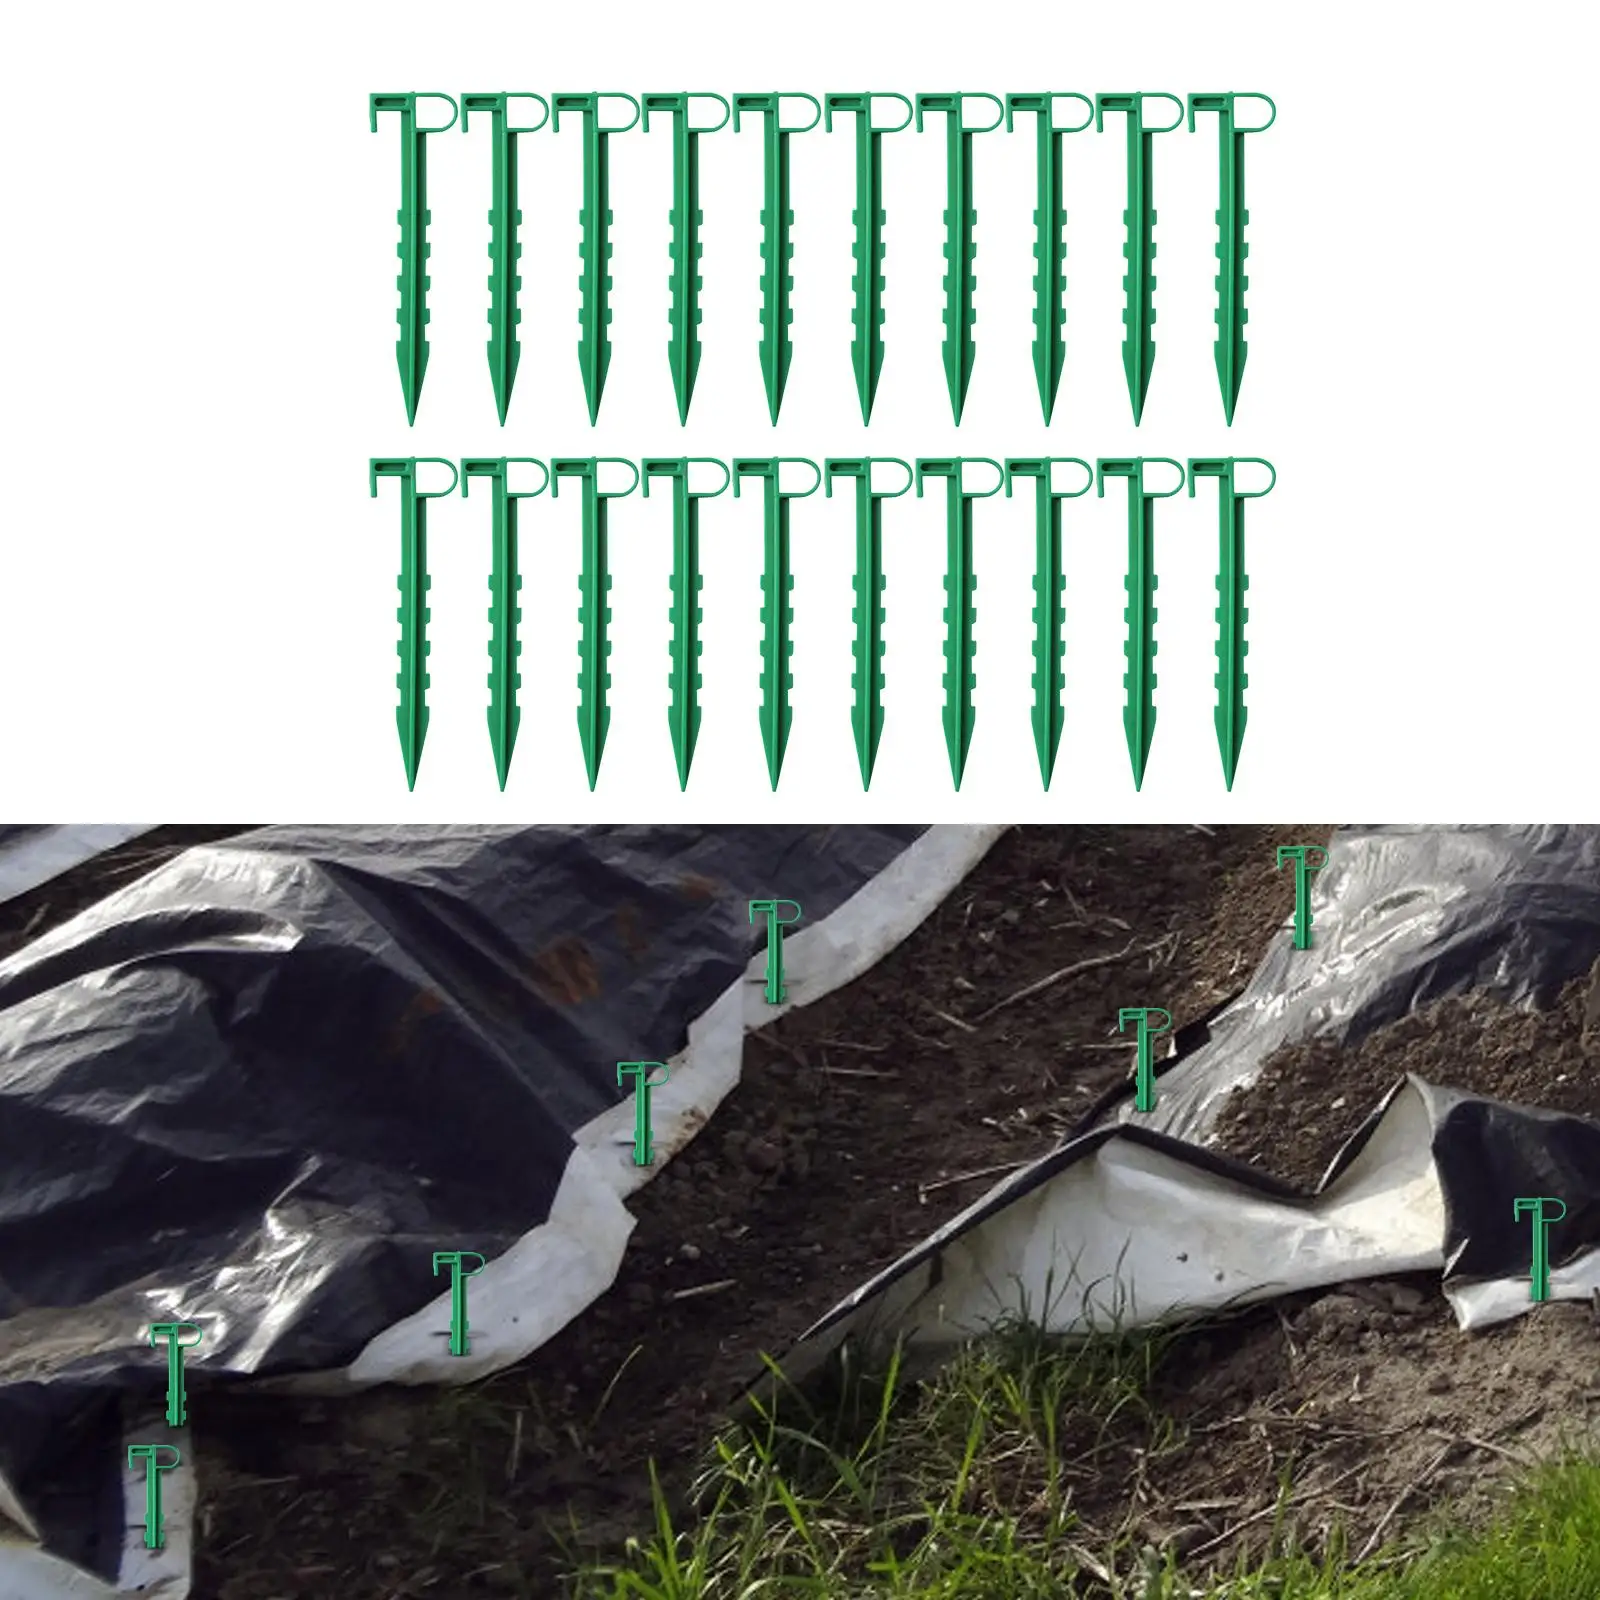 20Pcs Garden Stakes Ground Auger Fixation Anchor Pegs for Fabric Lawn Edging